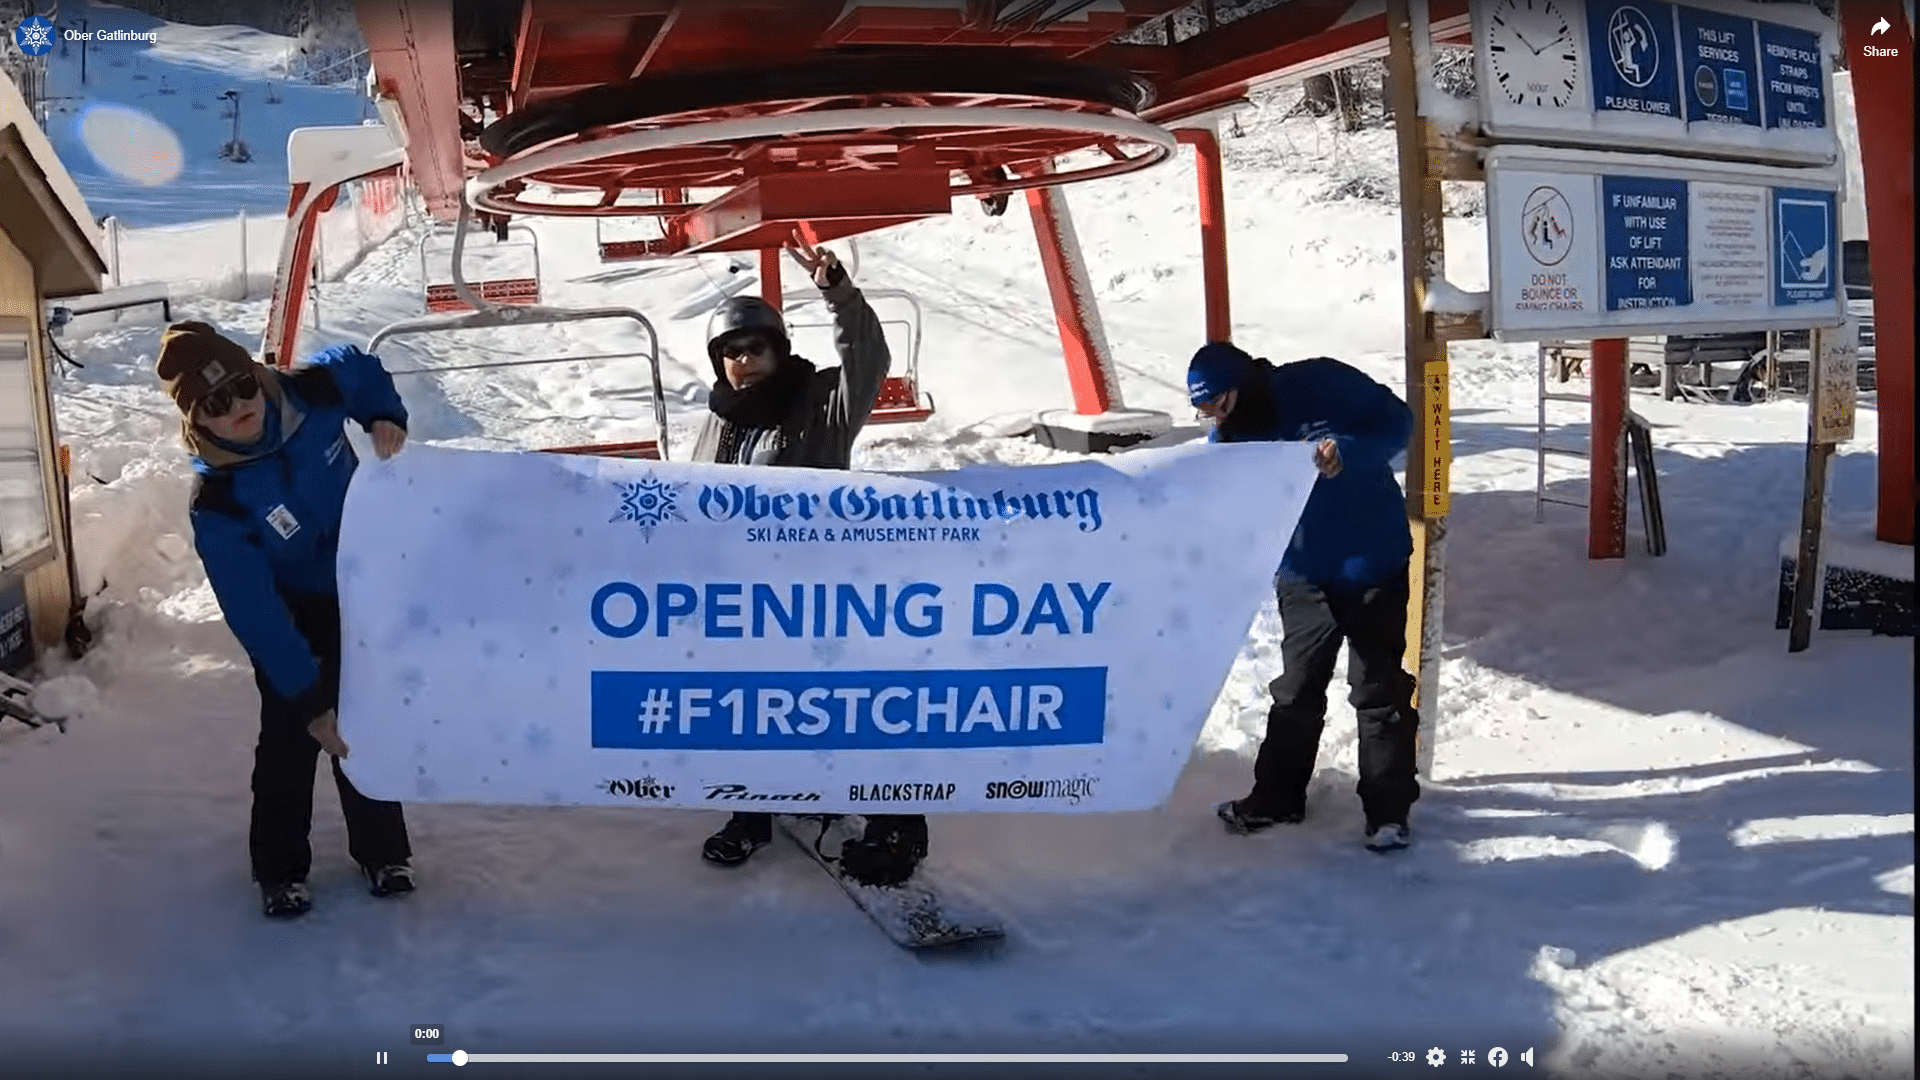 https://www.skisoutheast.com/wp-content/uploads/2022/01/2022-01-09-ober-opening-day.png